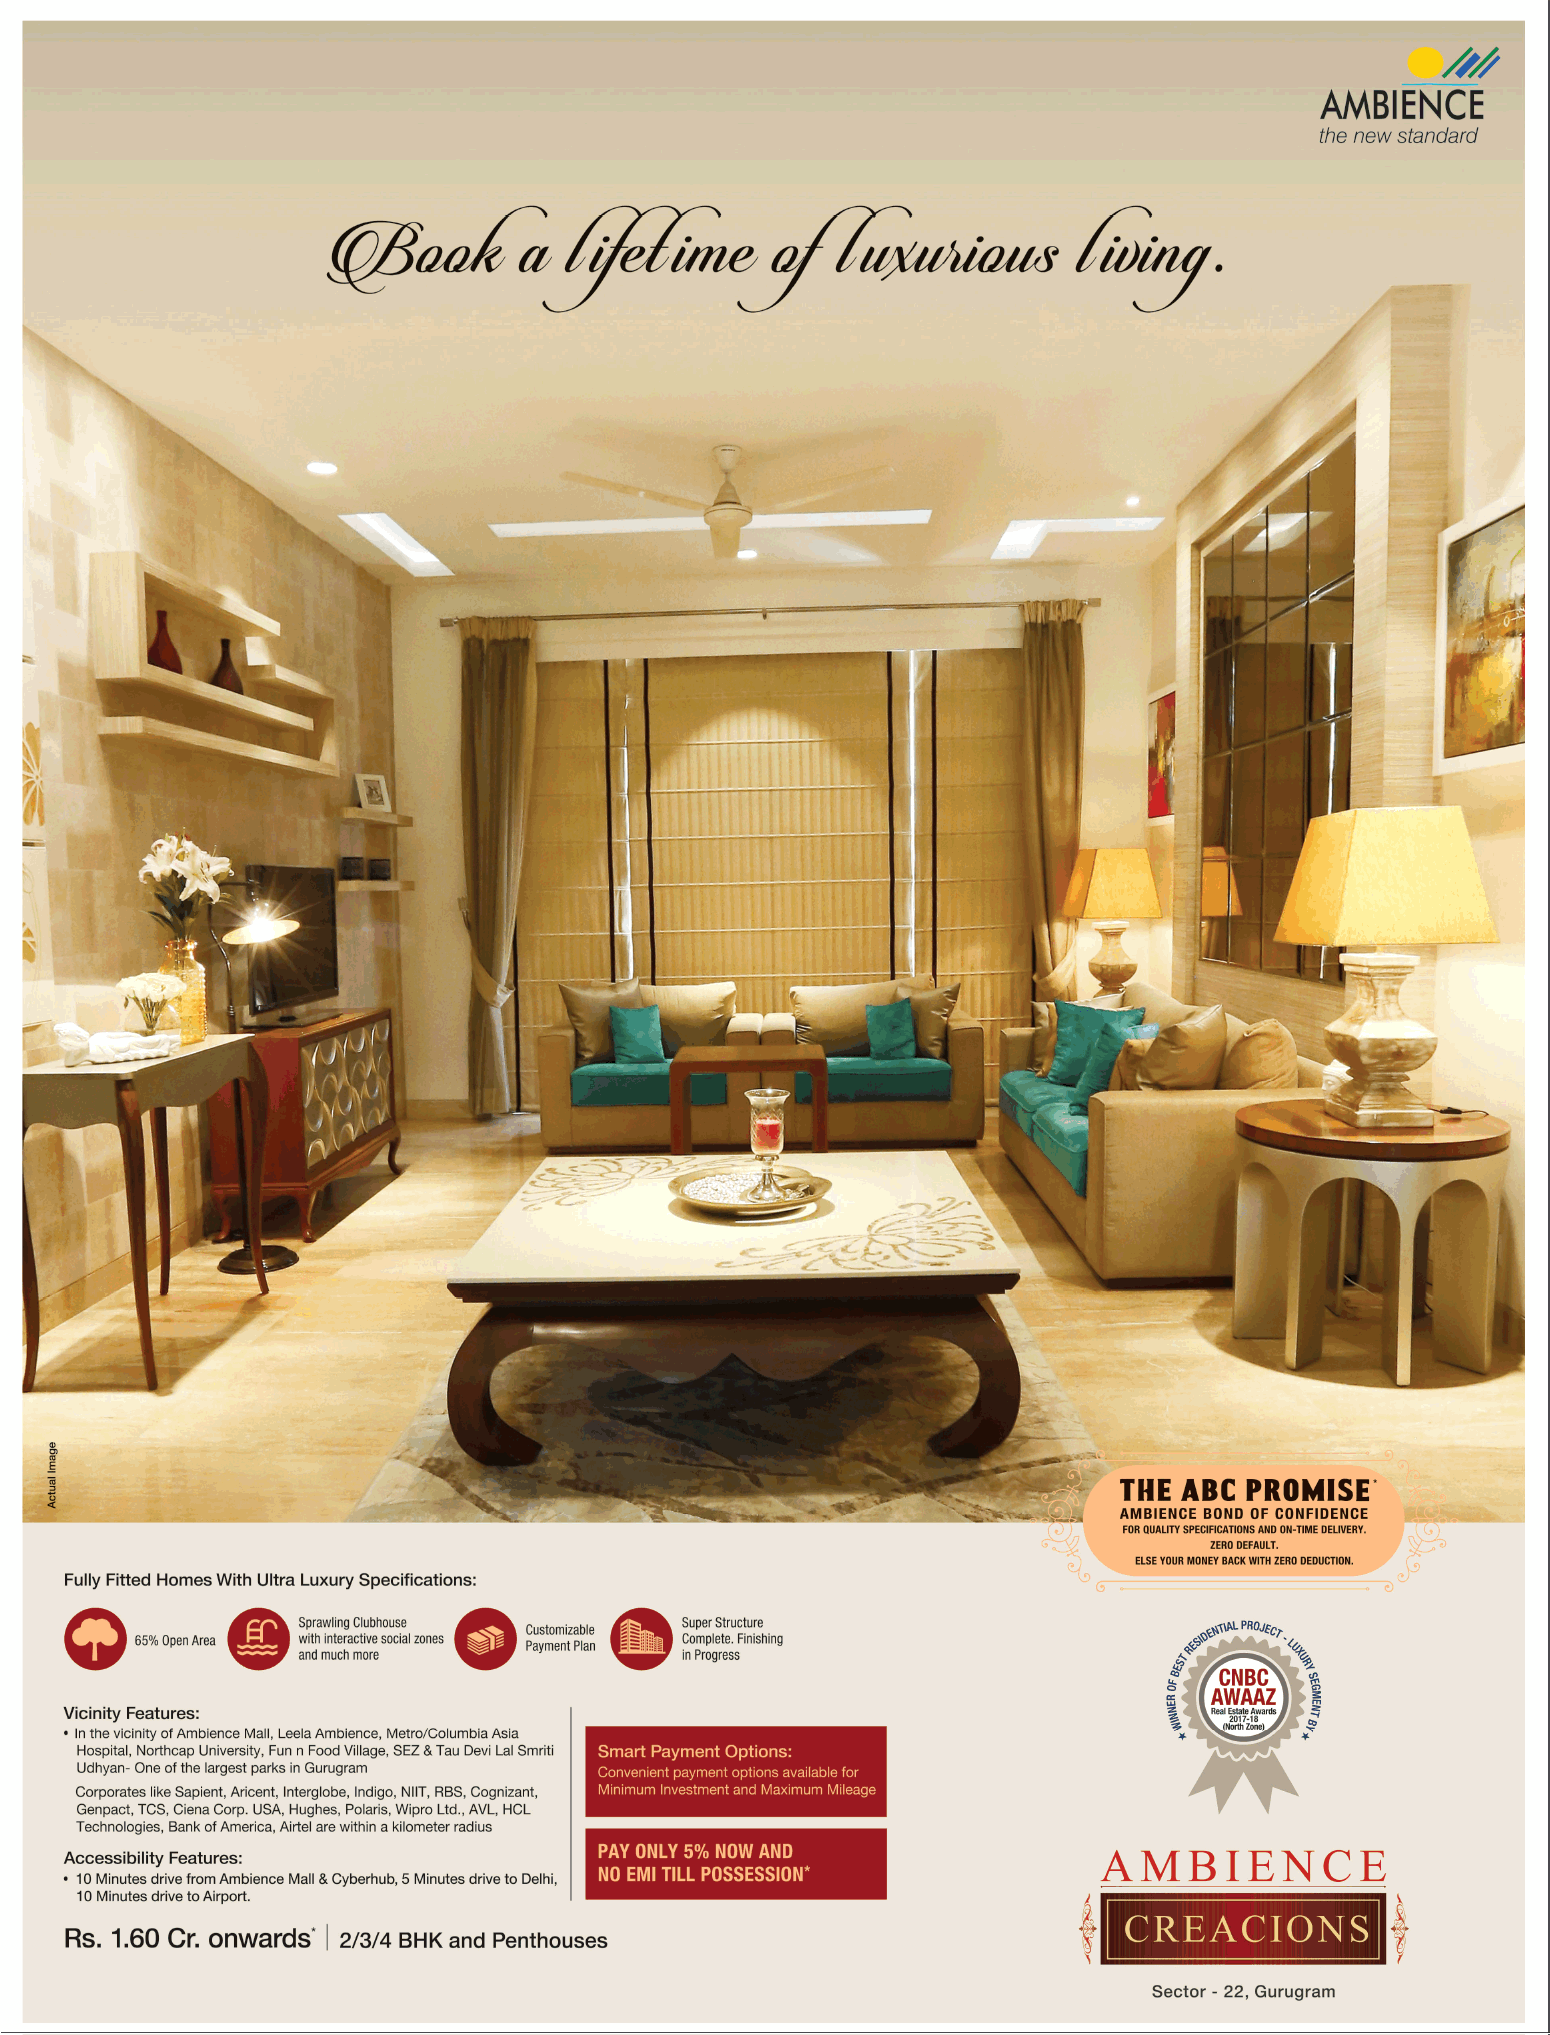 Book fully fitted homes with ultra luxury specifications at Ambience Creacions in Gurgaon Update